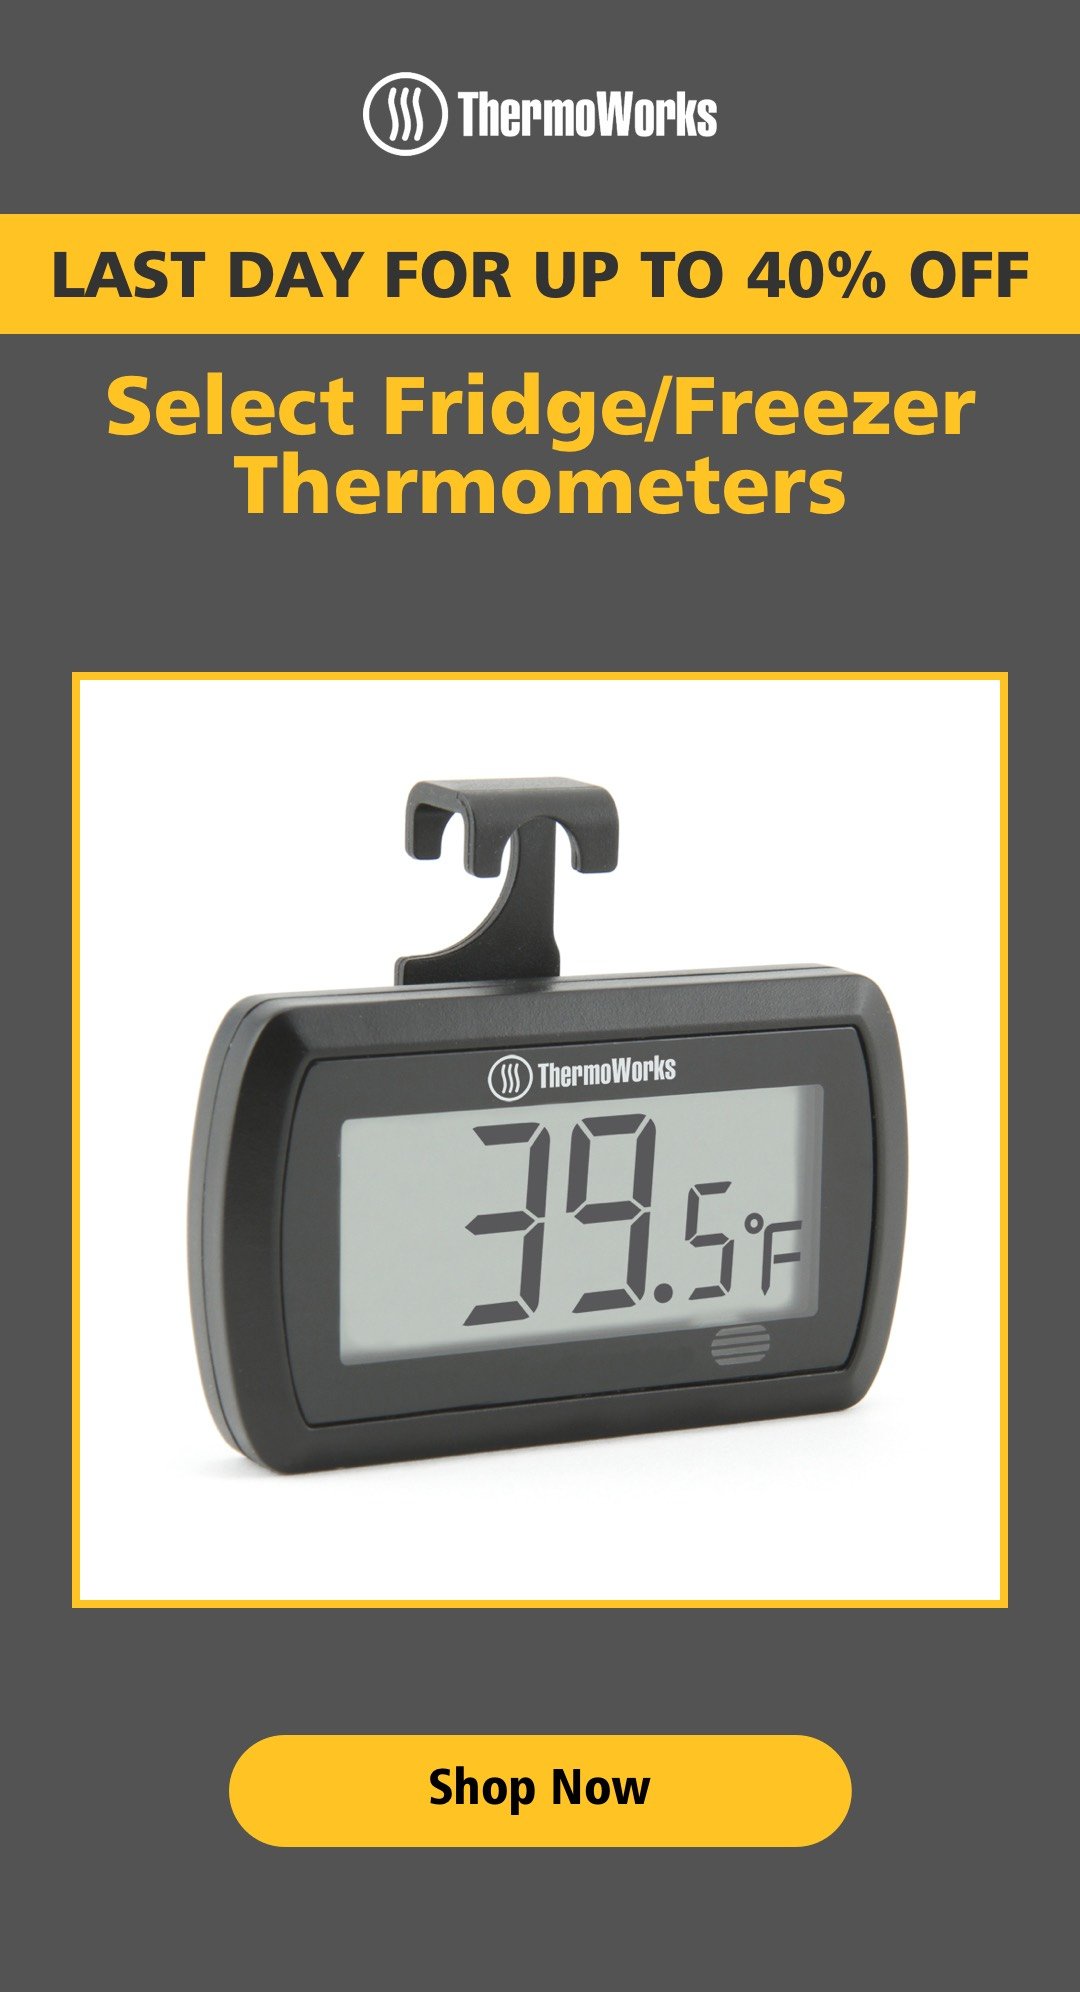 New ThermoWorks Outlet: Up to 50% Off - ThermoWorks